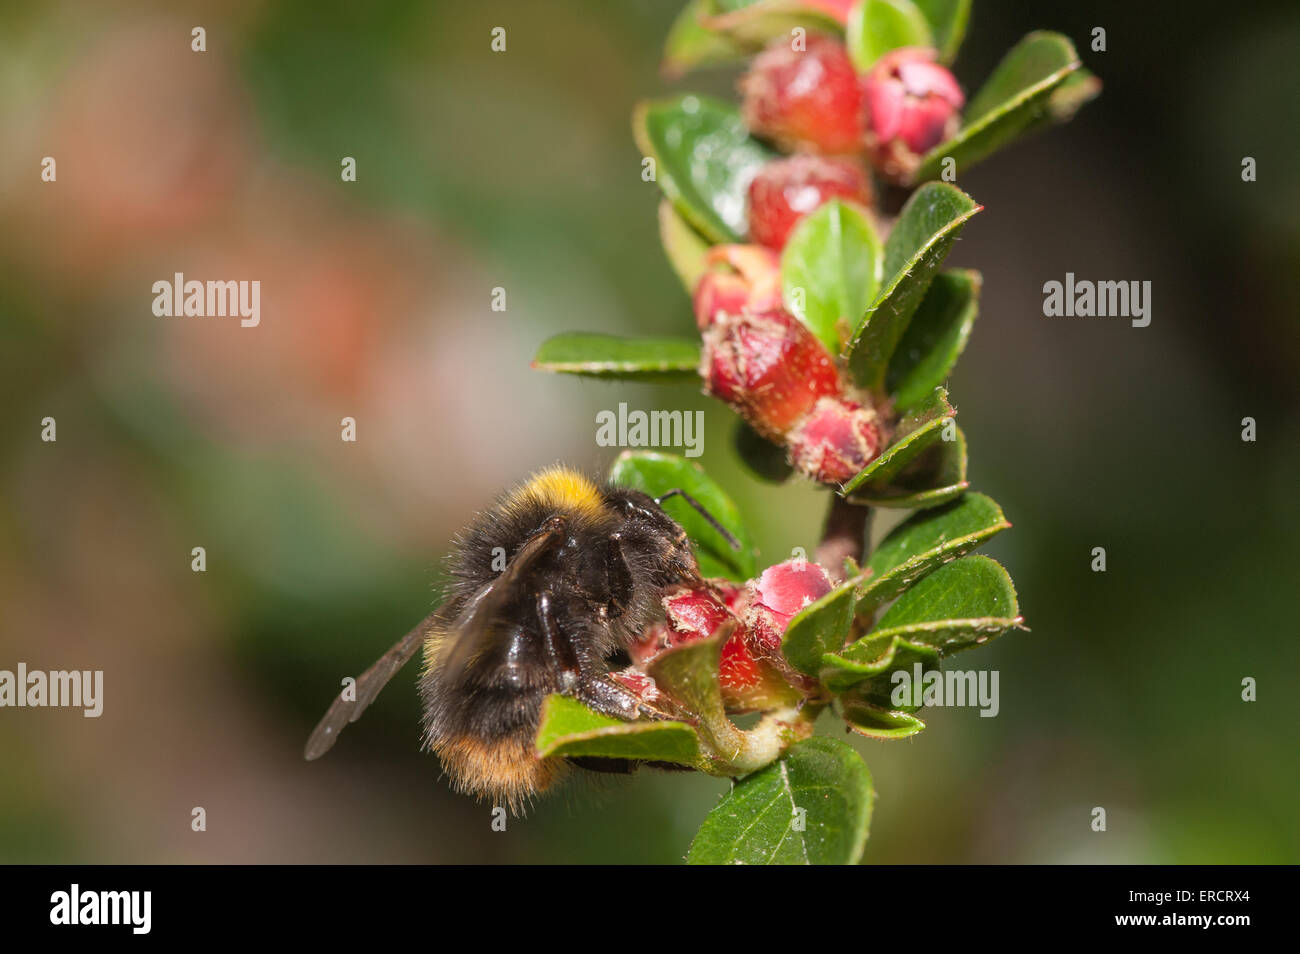 small early-nesting bumblebee B. pratorum seeking nectar on red cotoneaster flowers and collecting pollen grains Stock Photo